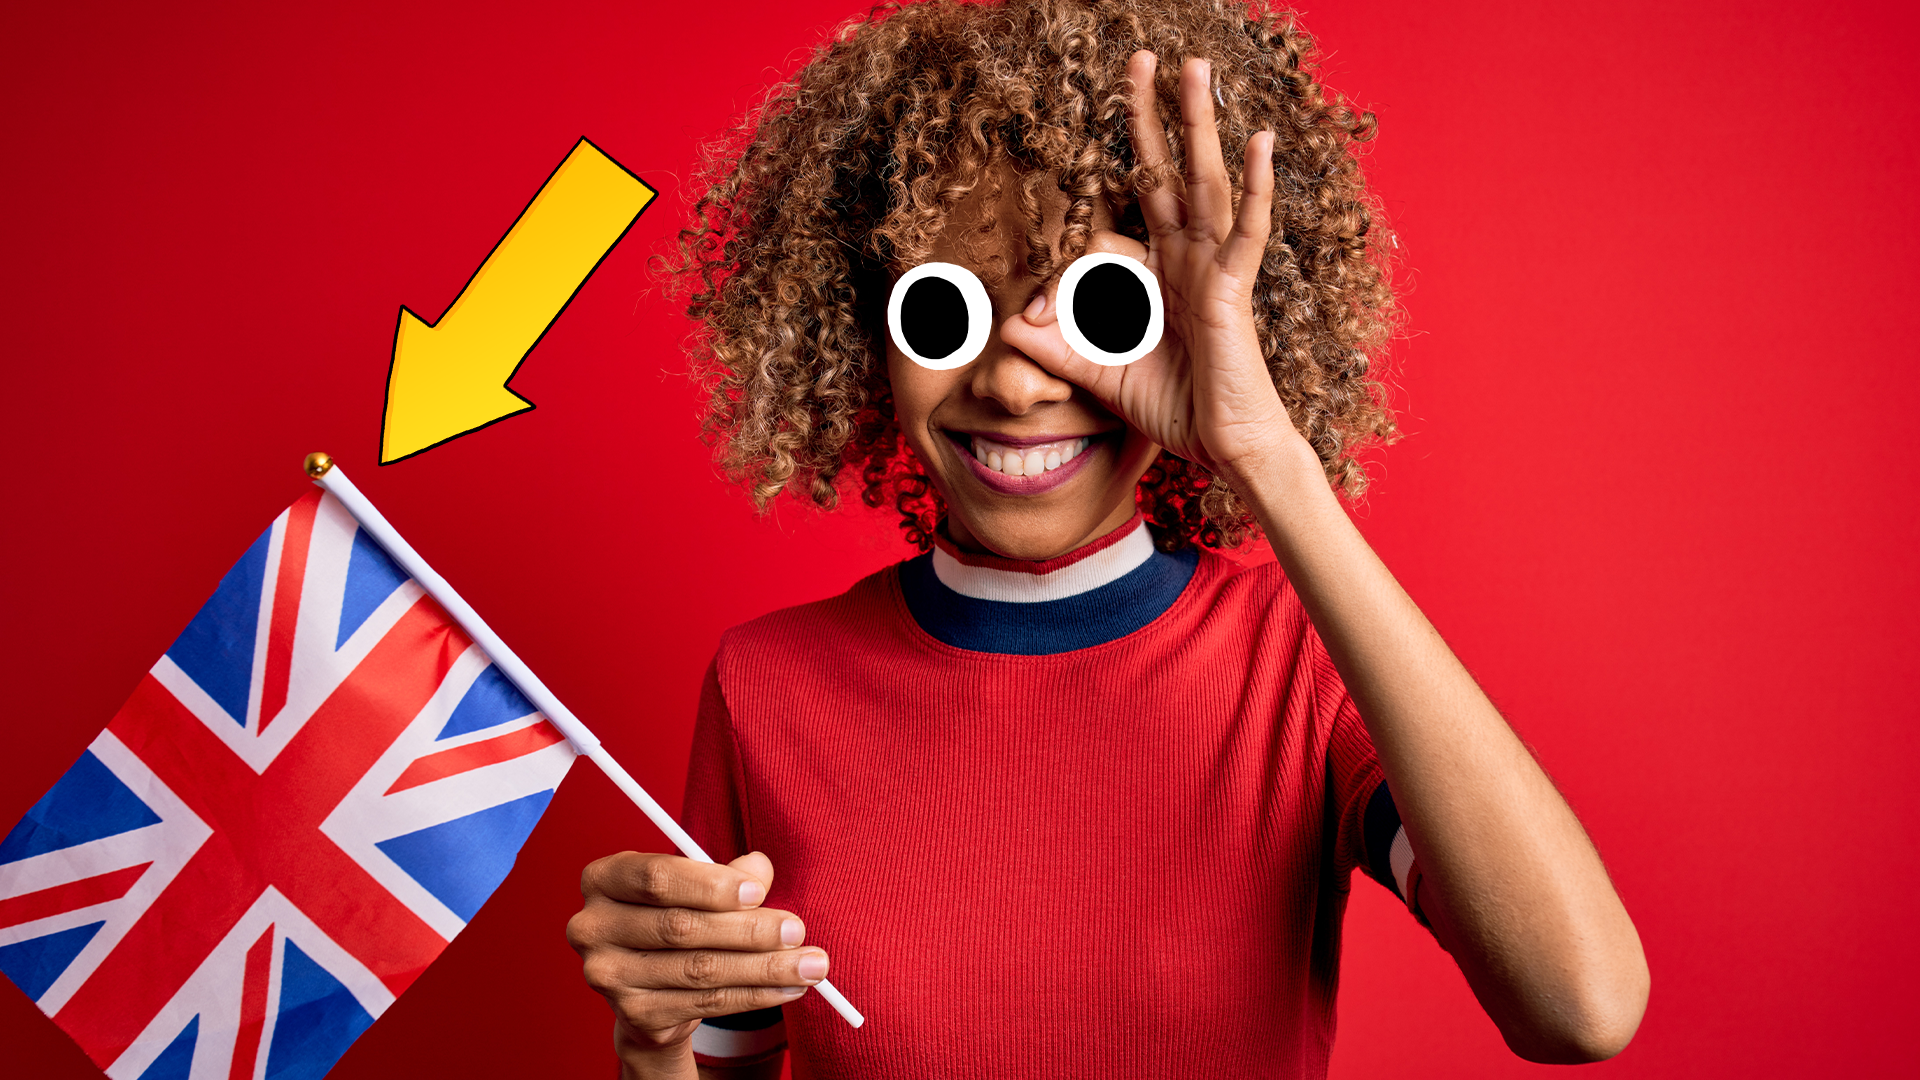 Woman waving UK flag on red background with arrow pointing to flag